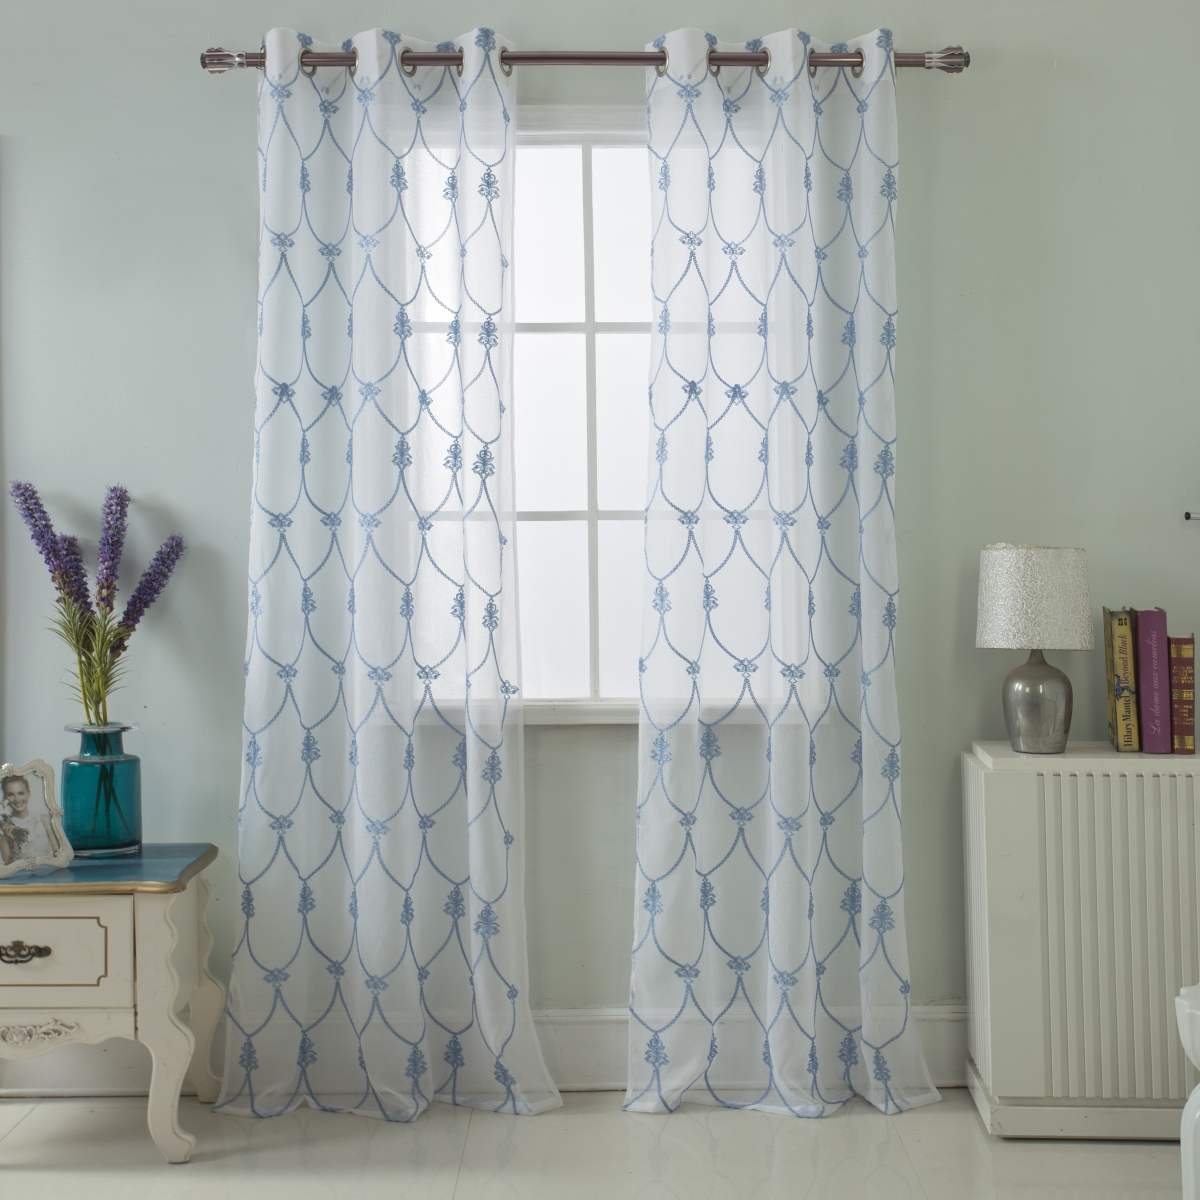 Pnw16996 76 X 84 In. Westgate Embroidered Grommet Curtain Panel, Wedgewood - Set Of 2